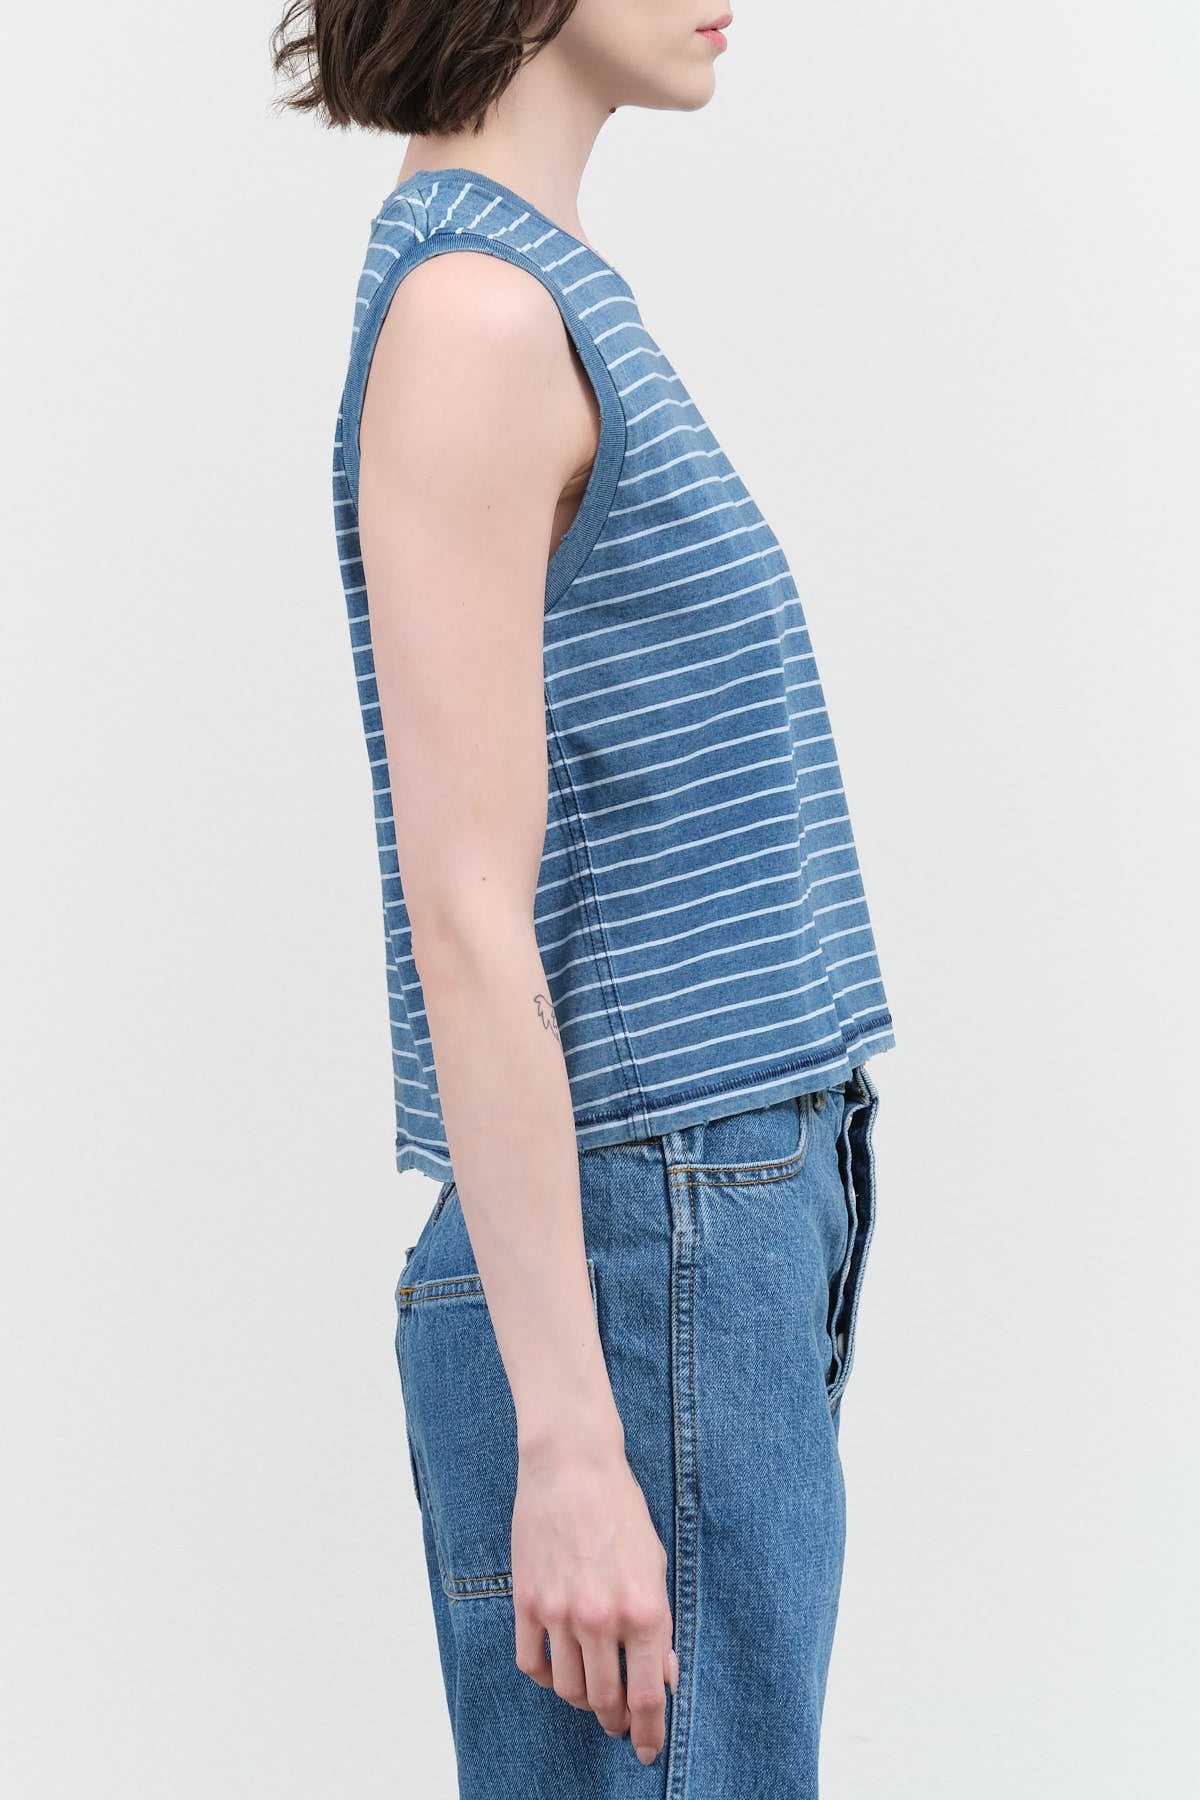 Striped Blue and White Tank by Amo Denim Sleeveless Babe Tee with Ribbed Hem